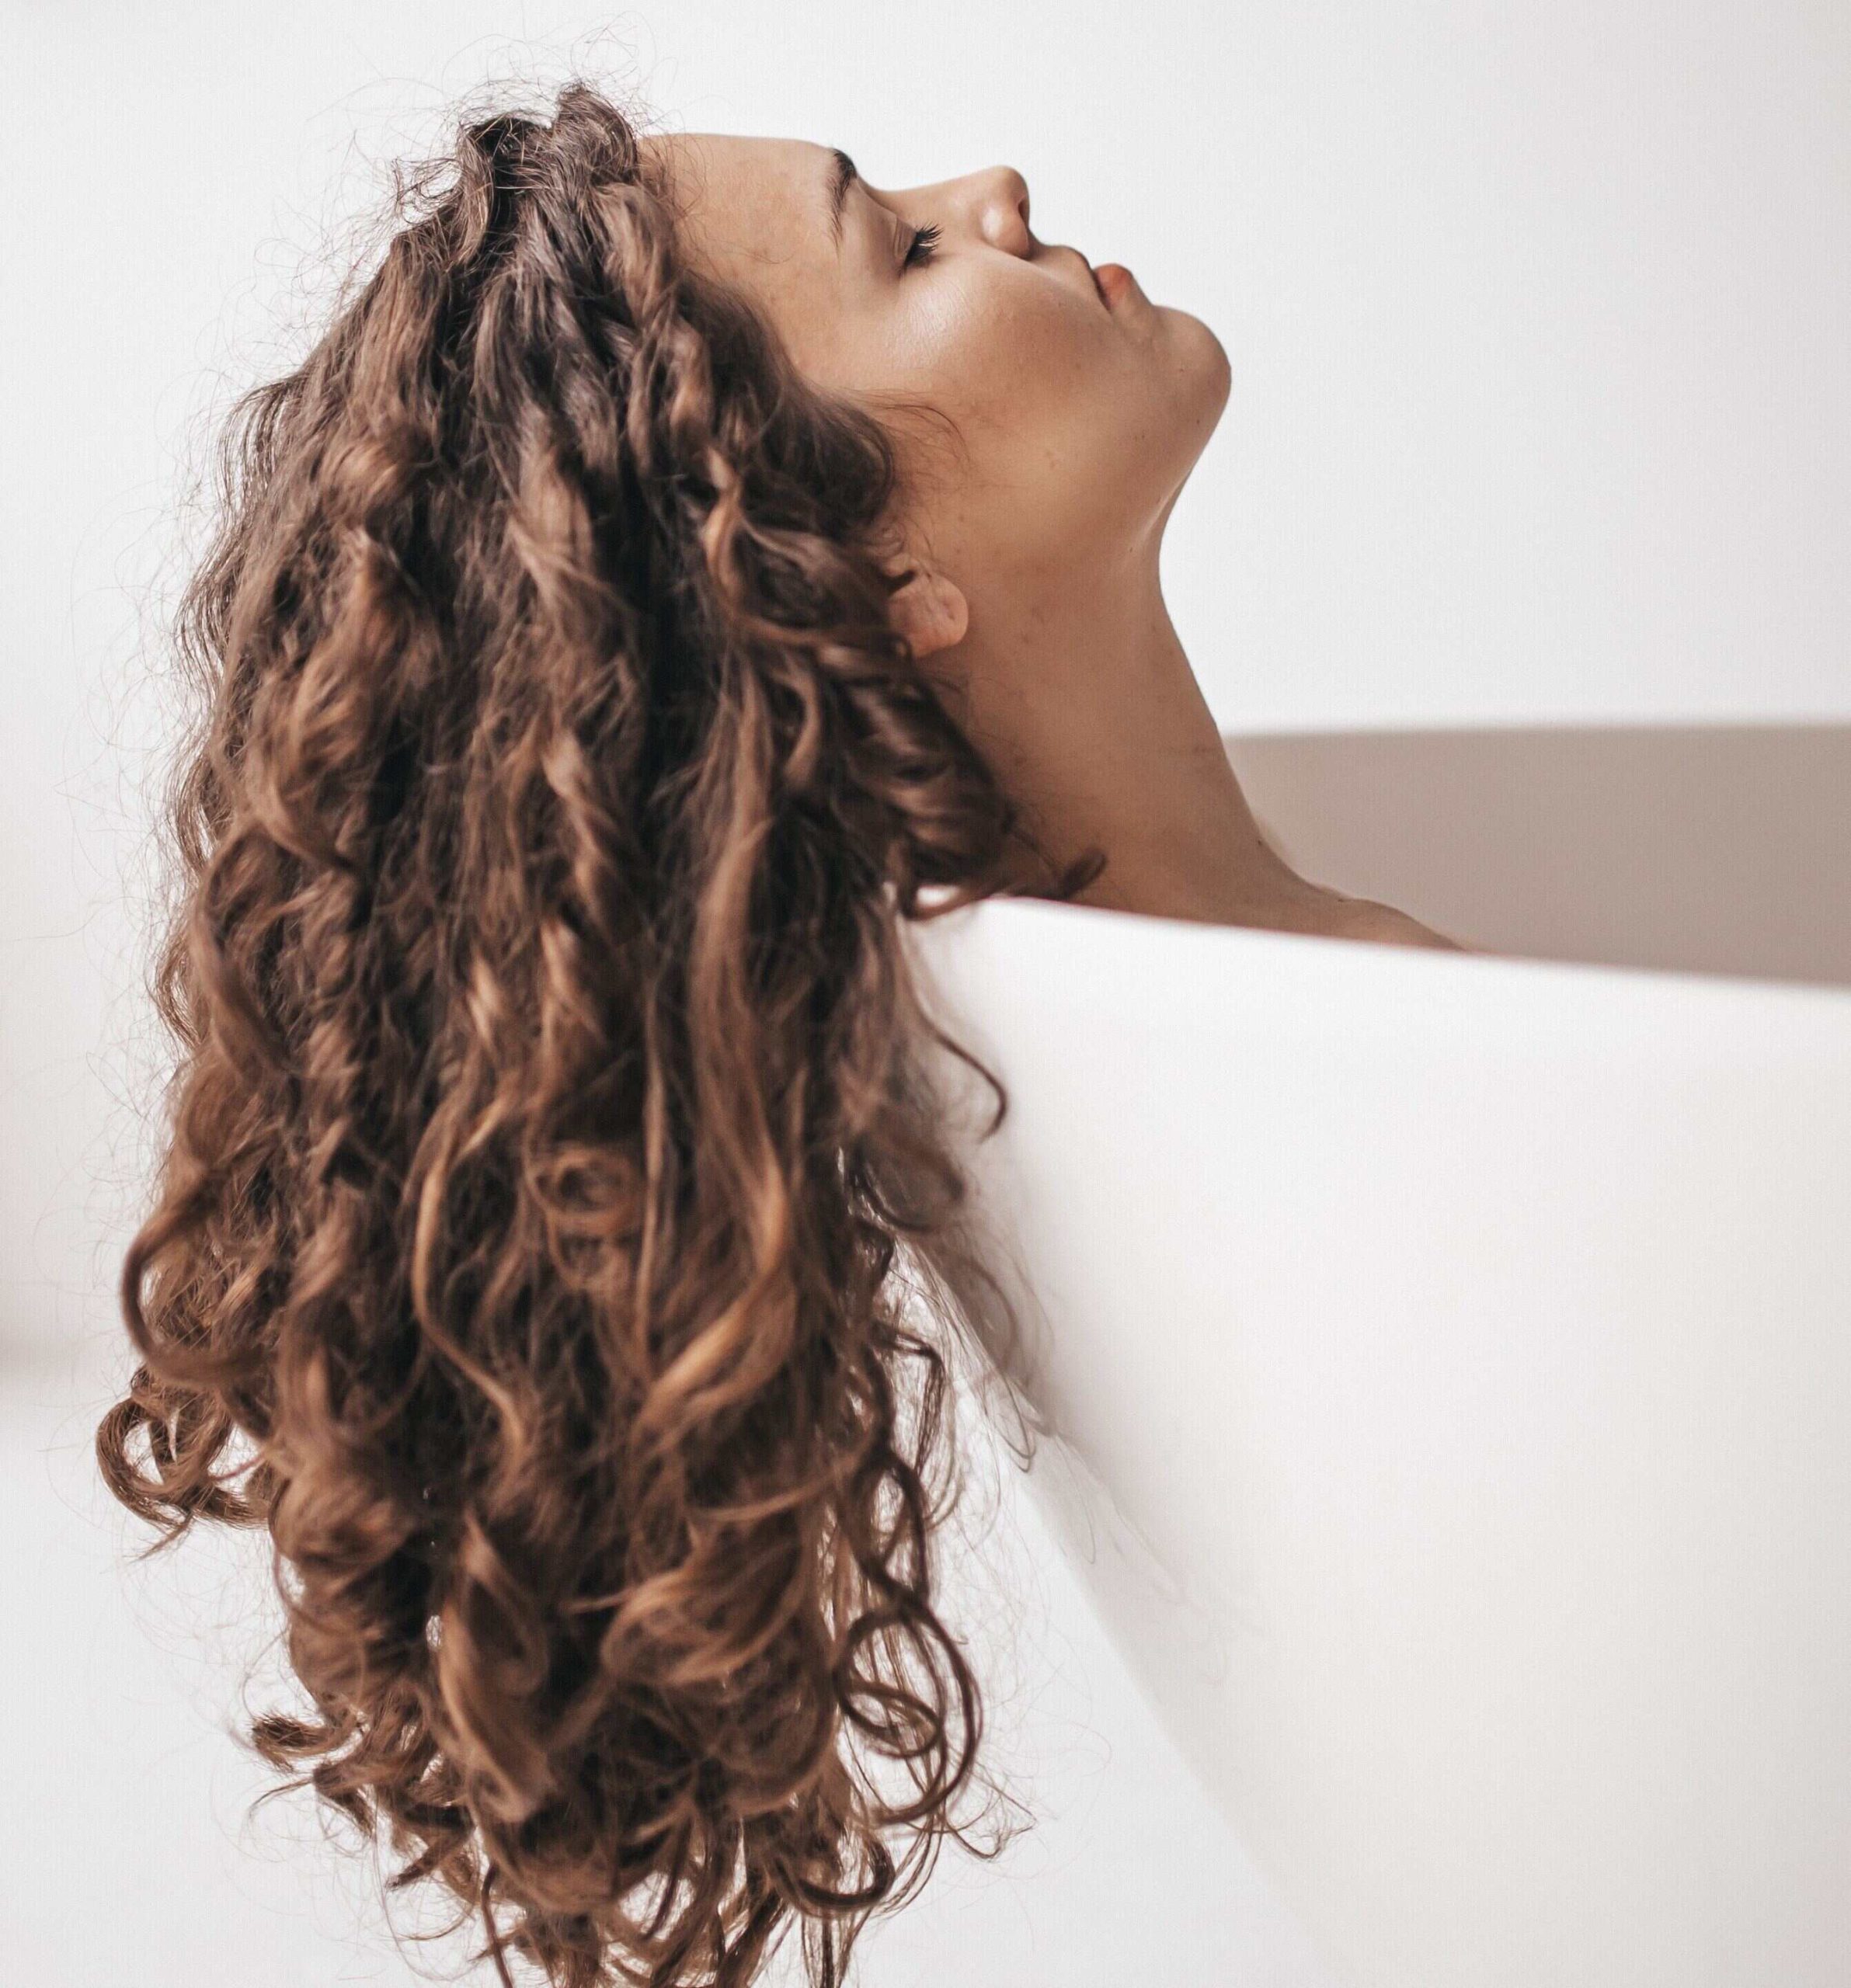 7 Days Hair Care Routine: A Comprehensive Guide to Healthy and Beautiful Hair